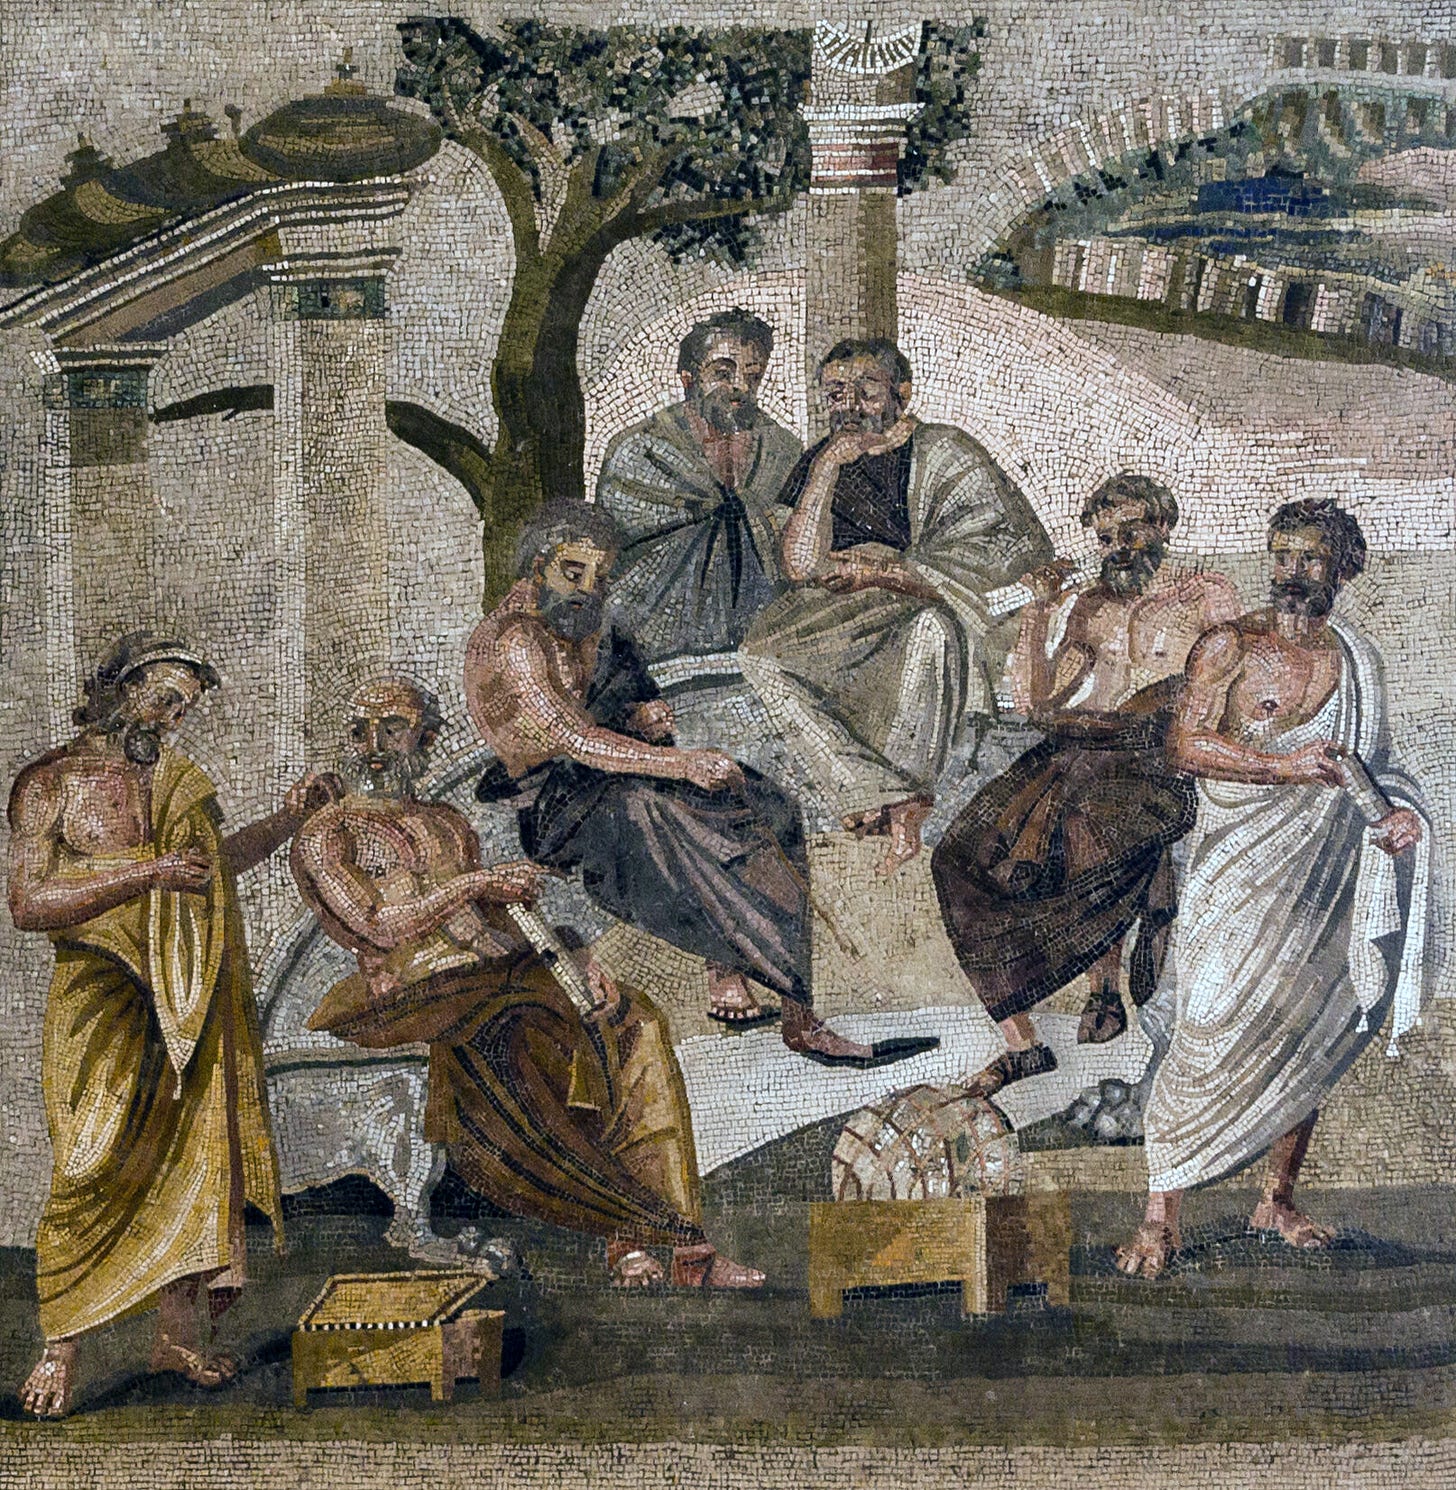 Mosaic depicting Plato at his academy surrounding by six students